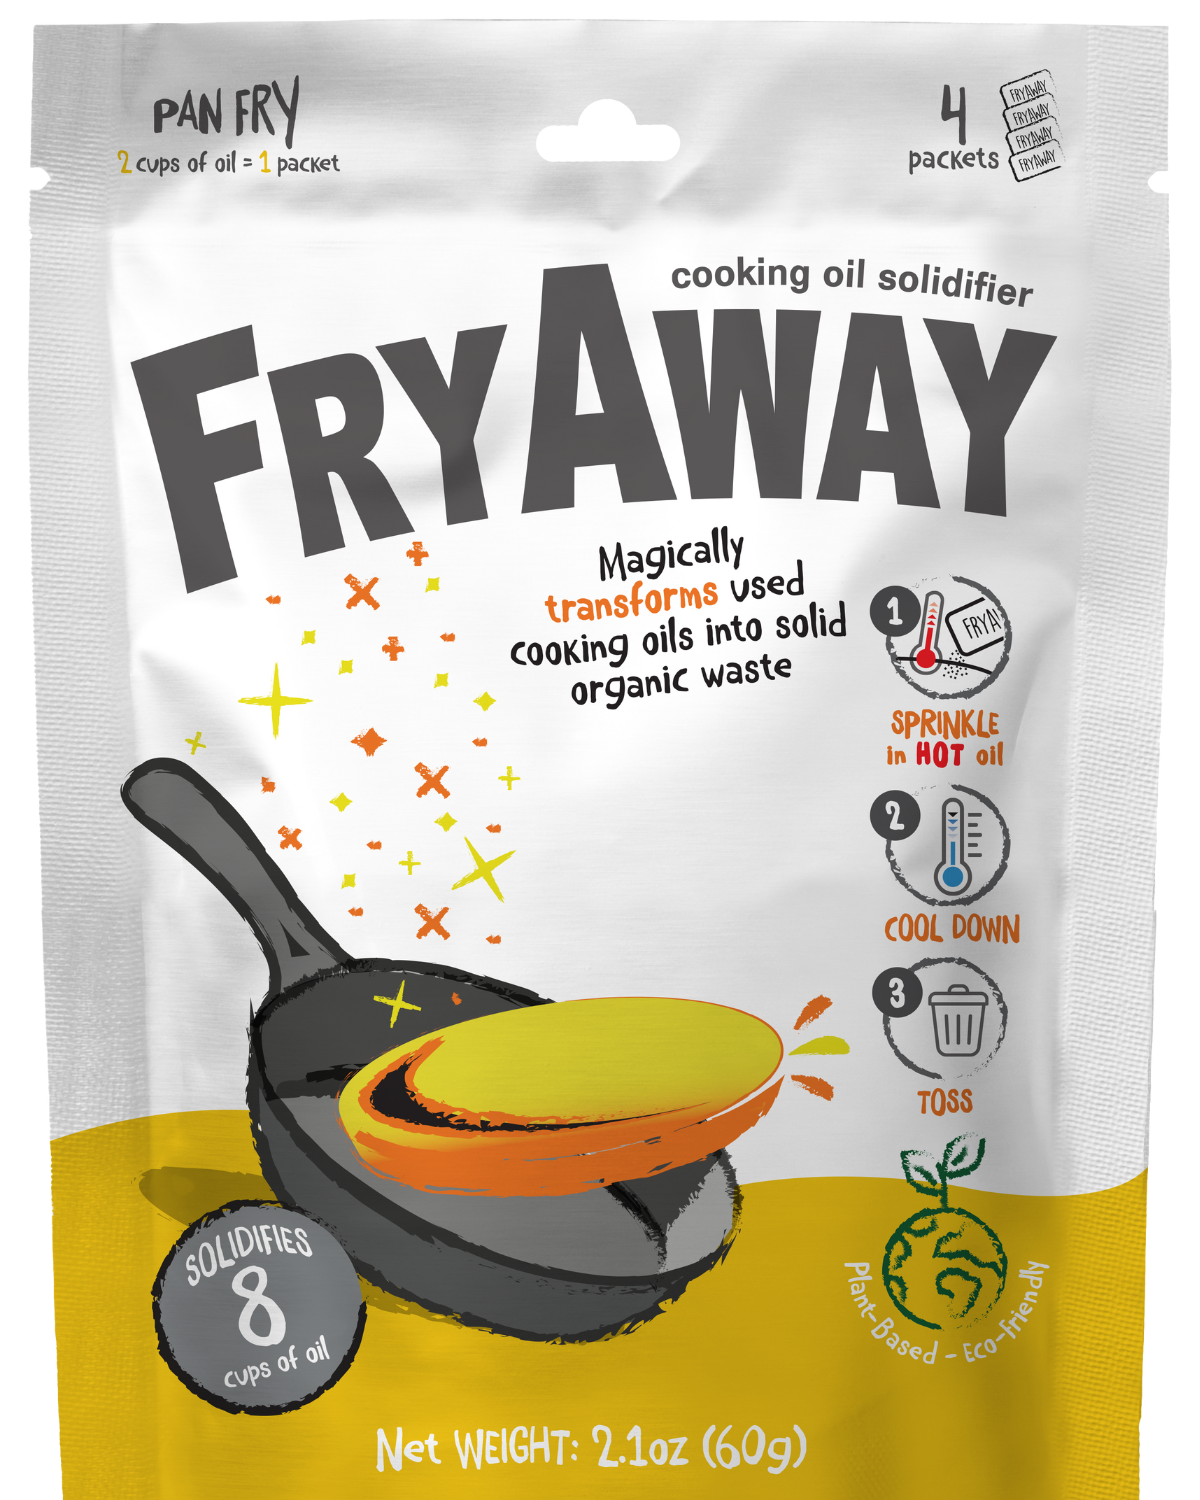 Struggling with oil disposal? FryAway makes it easy and safe to dispos